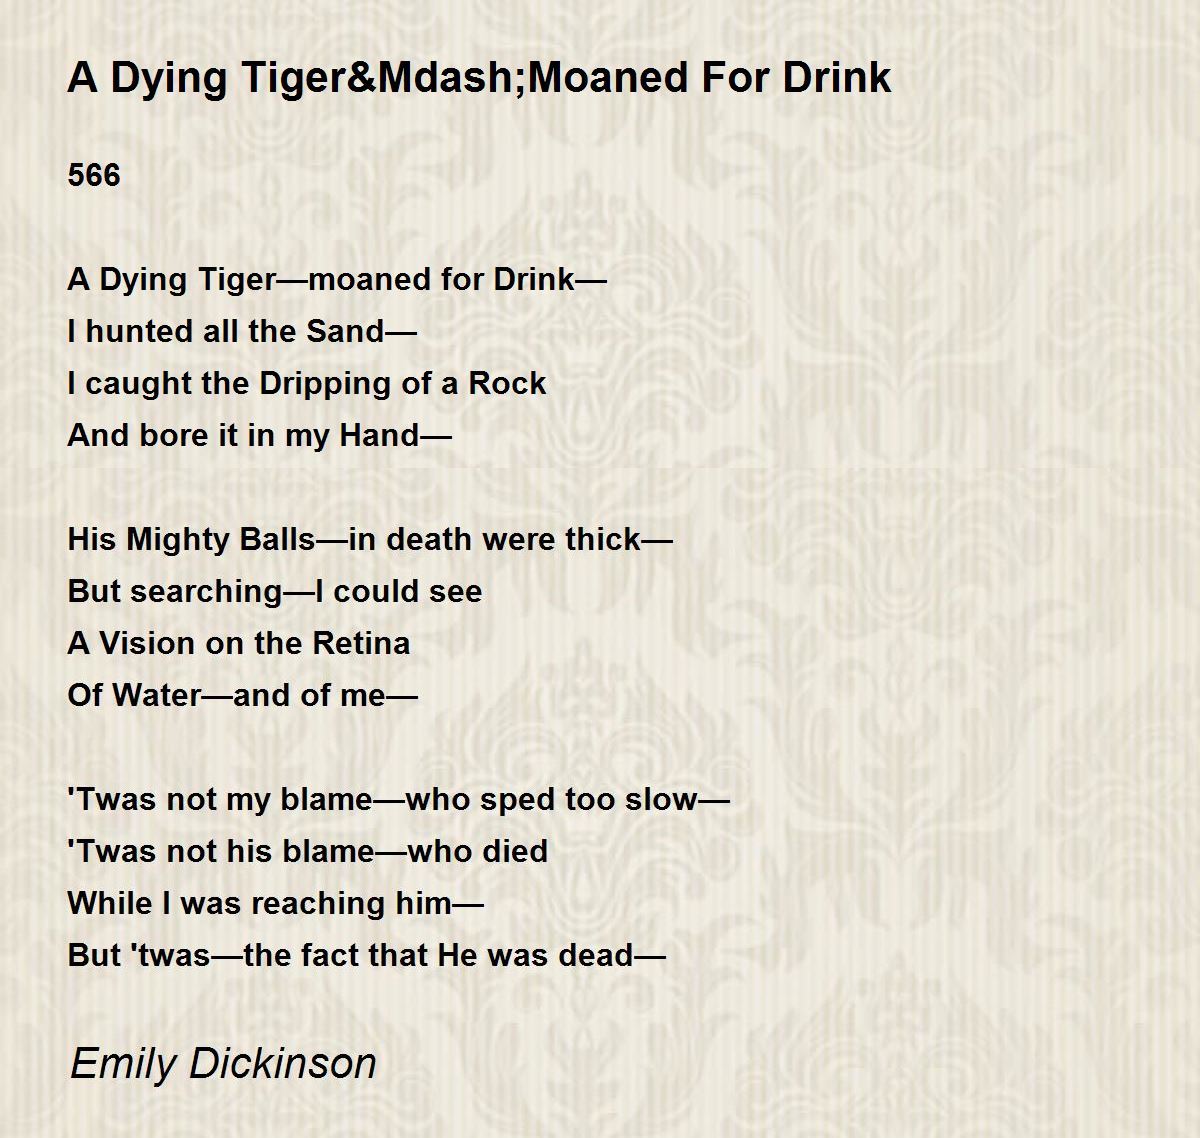 famous tiger poems